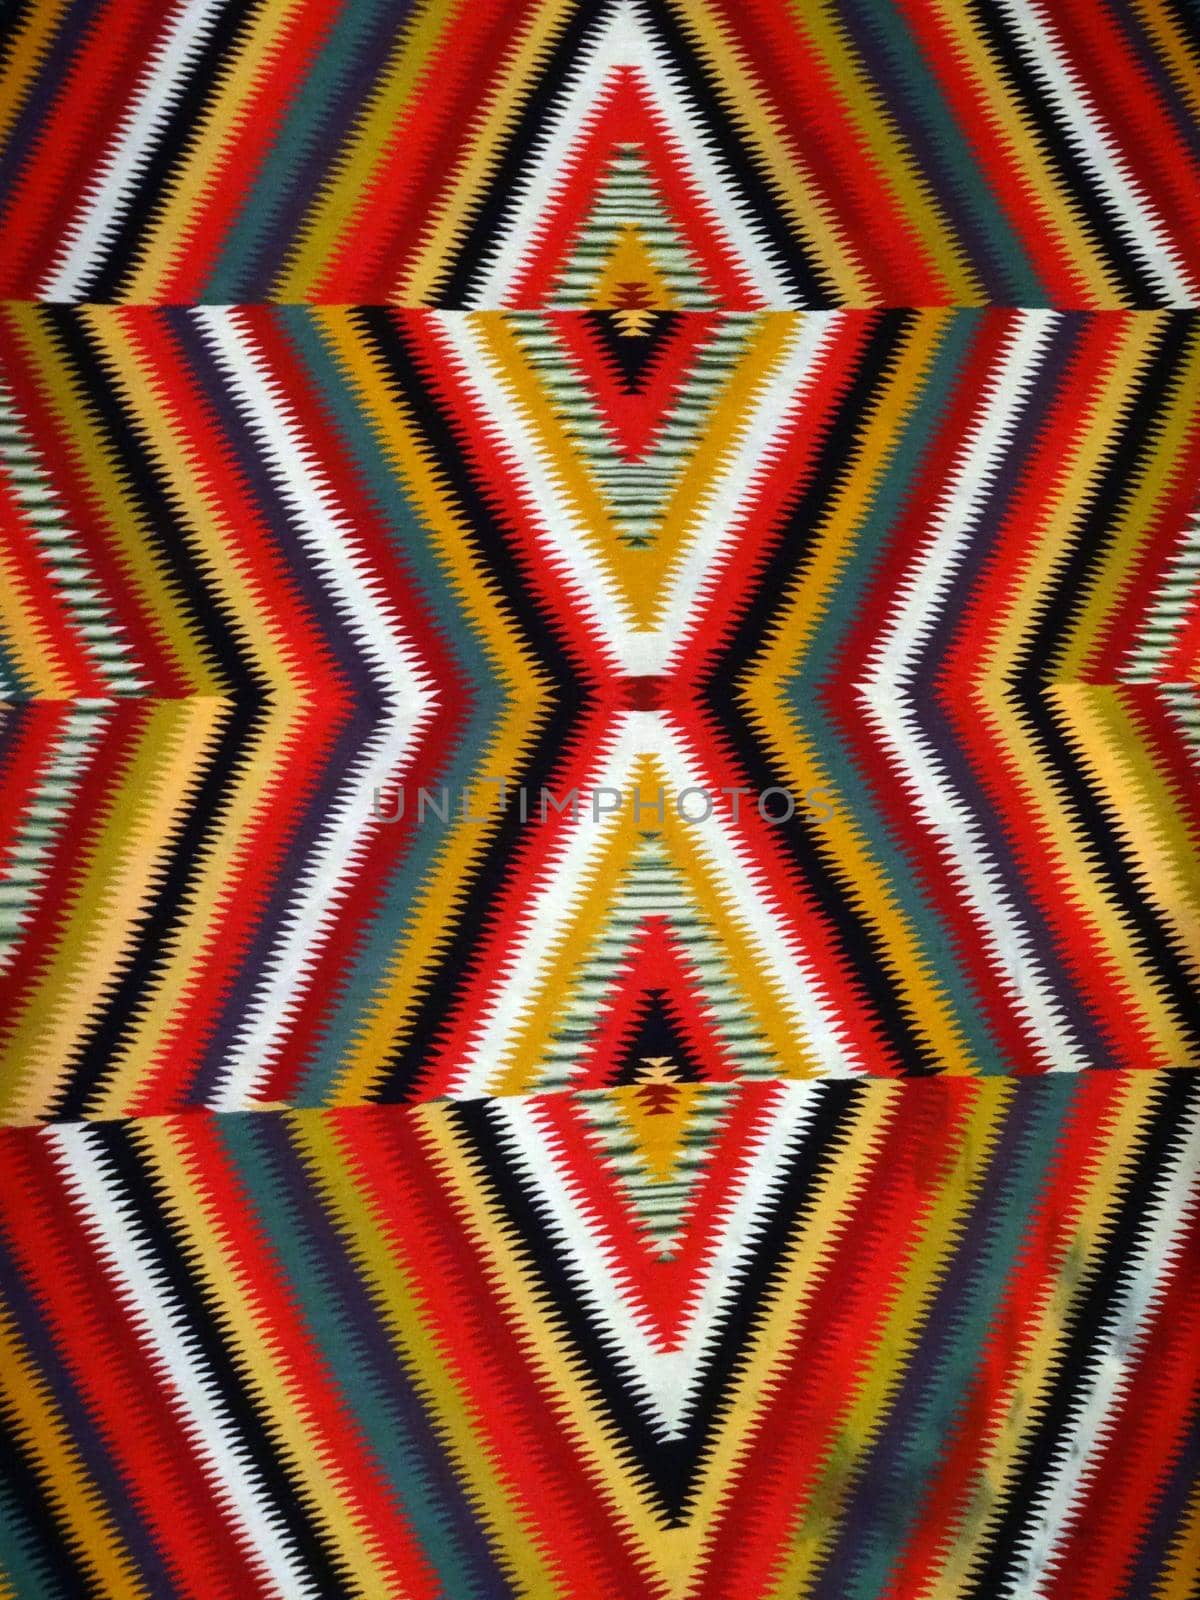 Pattern Red, Orange, White, Green, Black, and blue Diamond Blanket/ Rug - Navajo Artist, made about 1885 of cotton and wool.                              